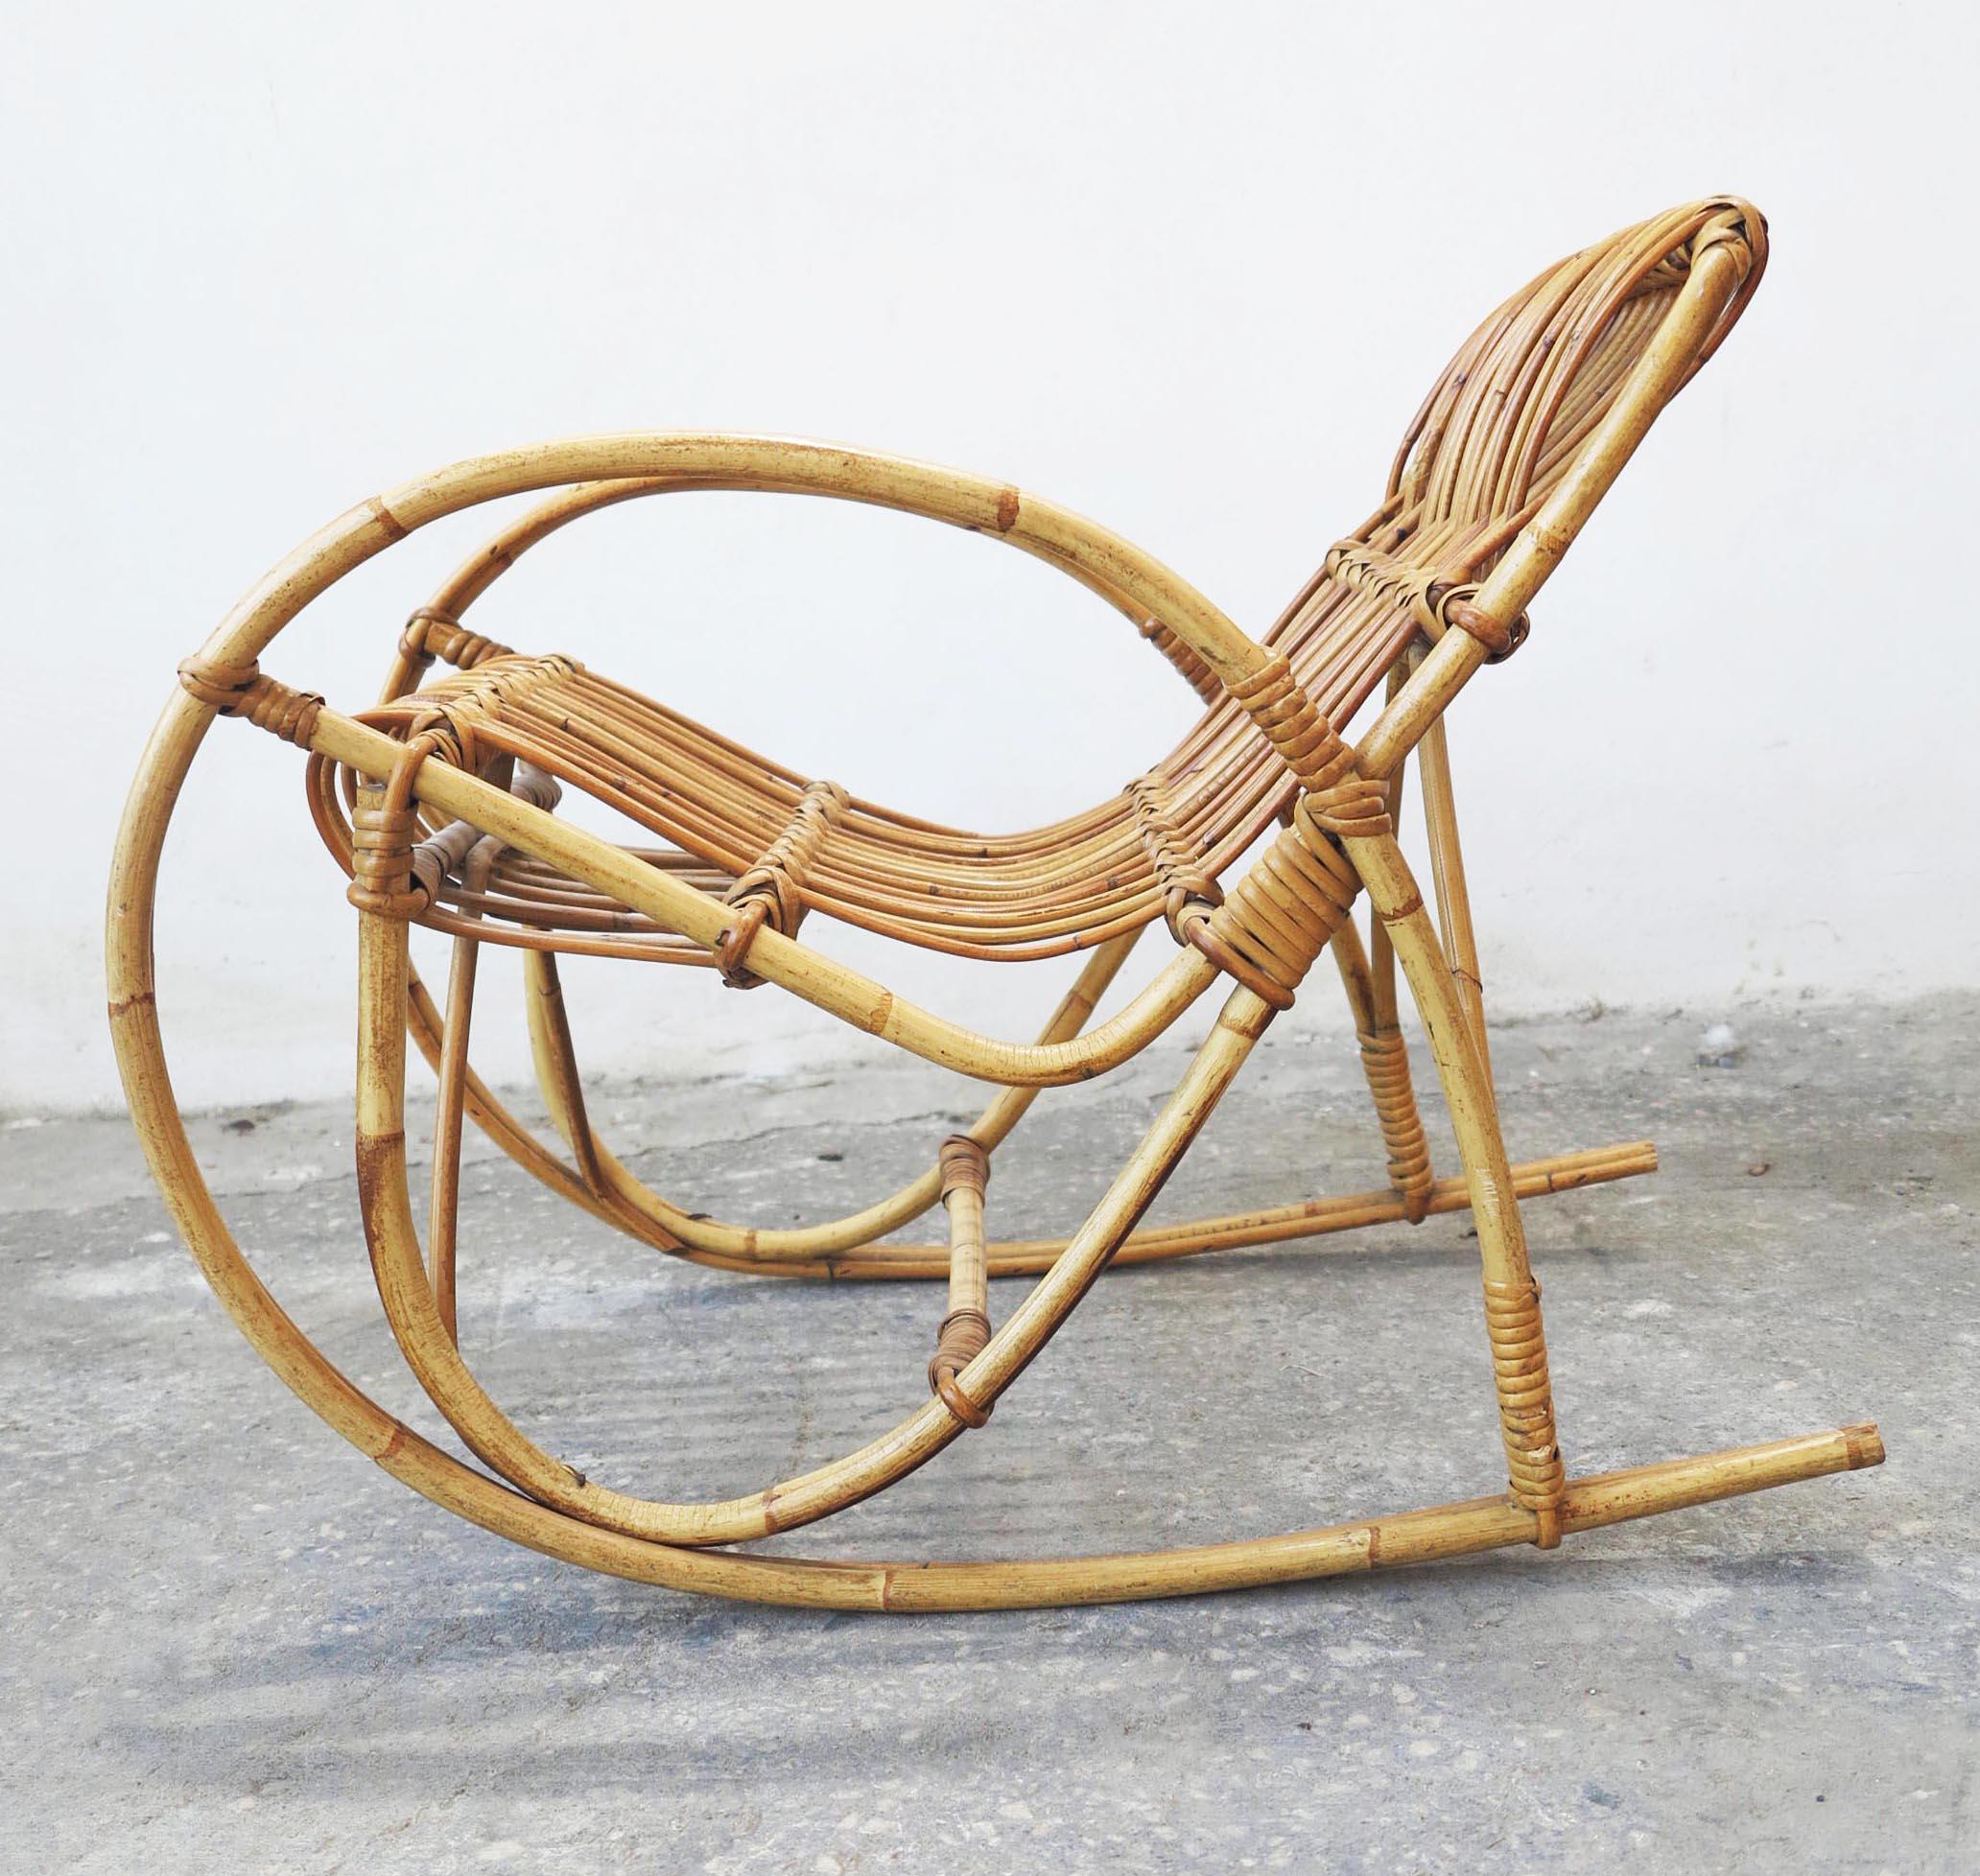 Italian Bamboo or Rattan Rocking Child's Chair, Midcentury Style, Bonacina Style In Good Condition For Sale In Fregene, IT